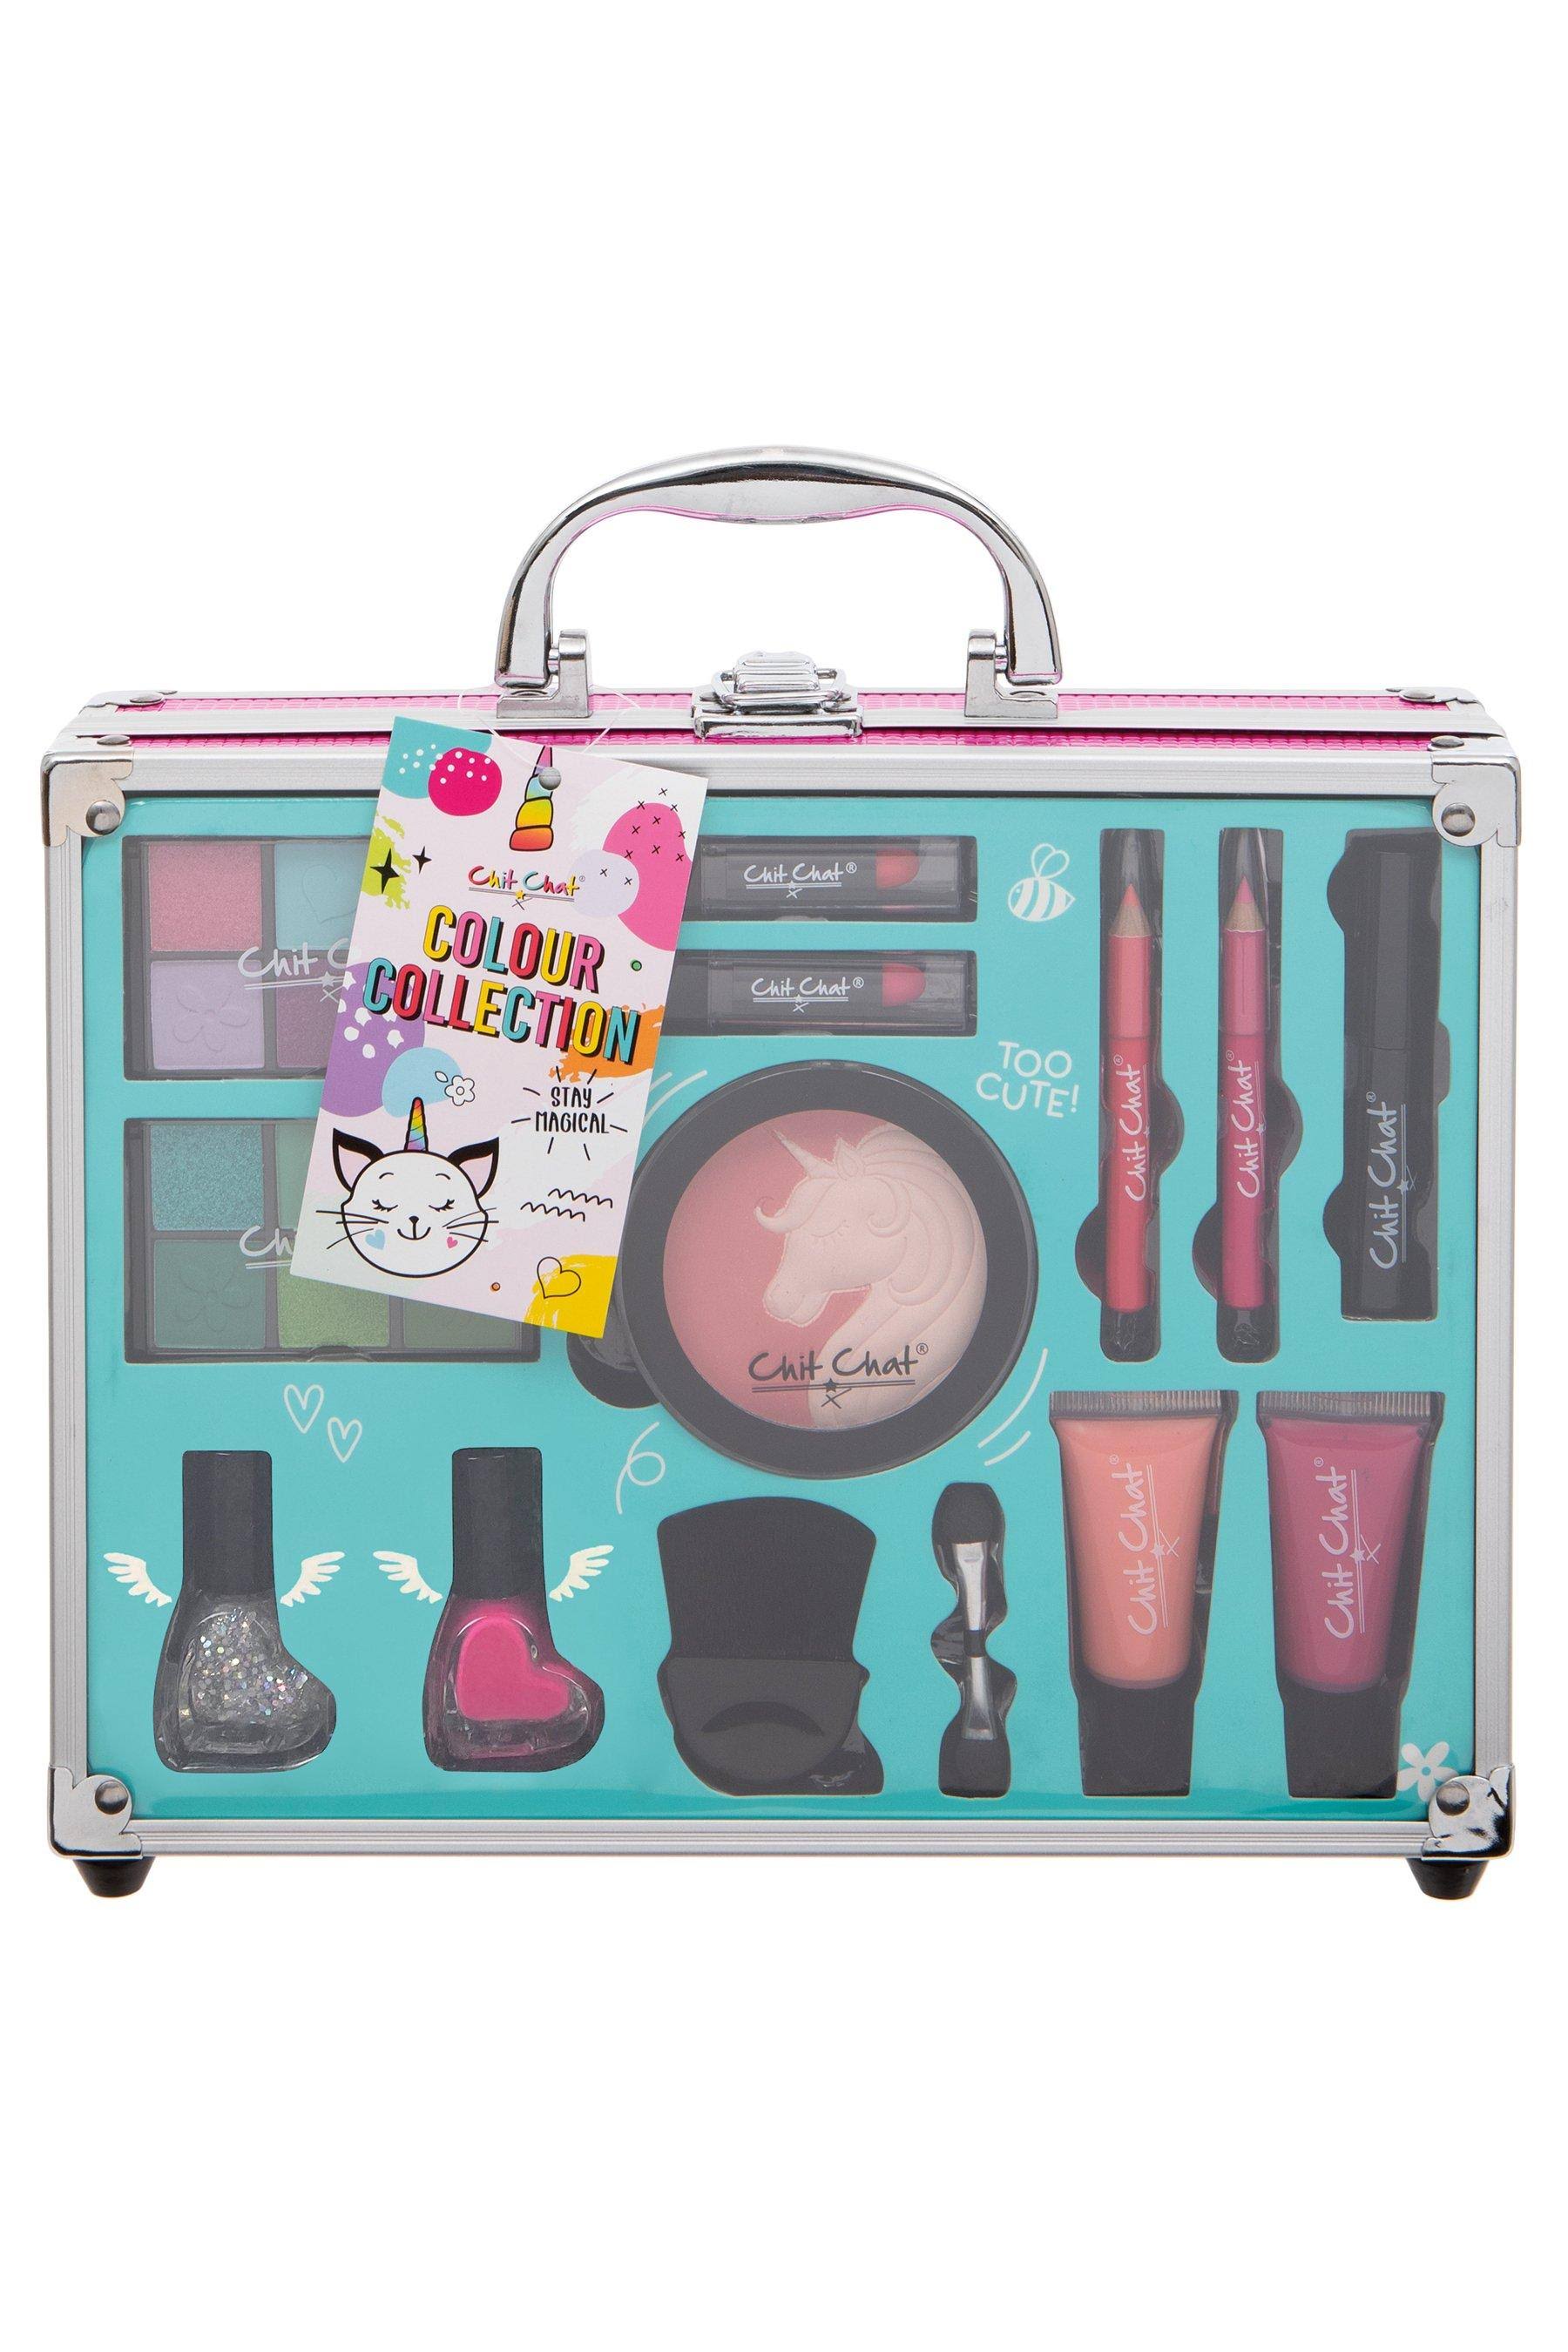 Chit Chat Colour Collection Cosmetics Case Girls Teenage Make Up Beauty Gift Set